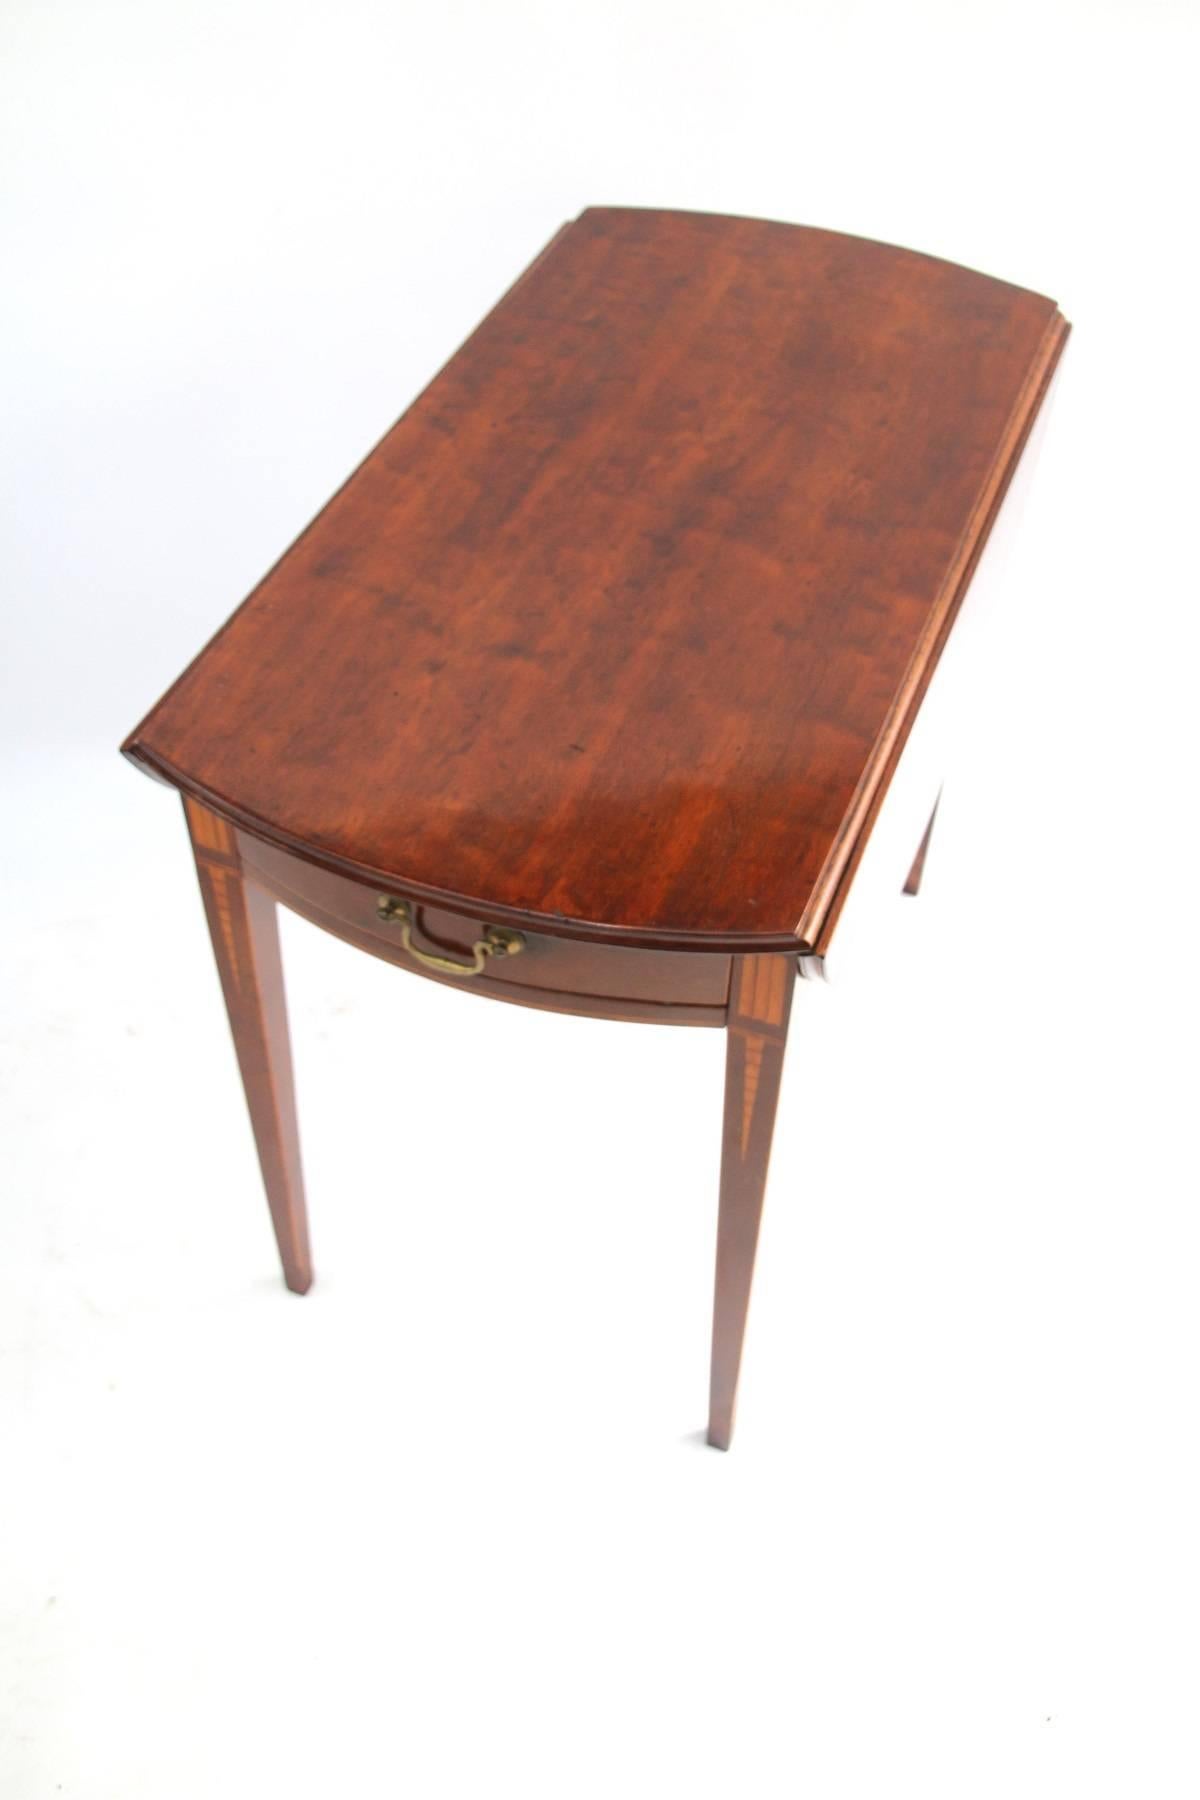 American Early 19th Century Connecticut Mahogany Pembroke Table For Sale